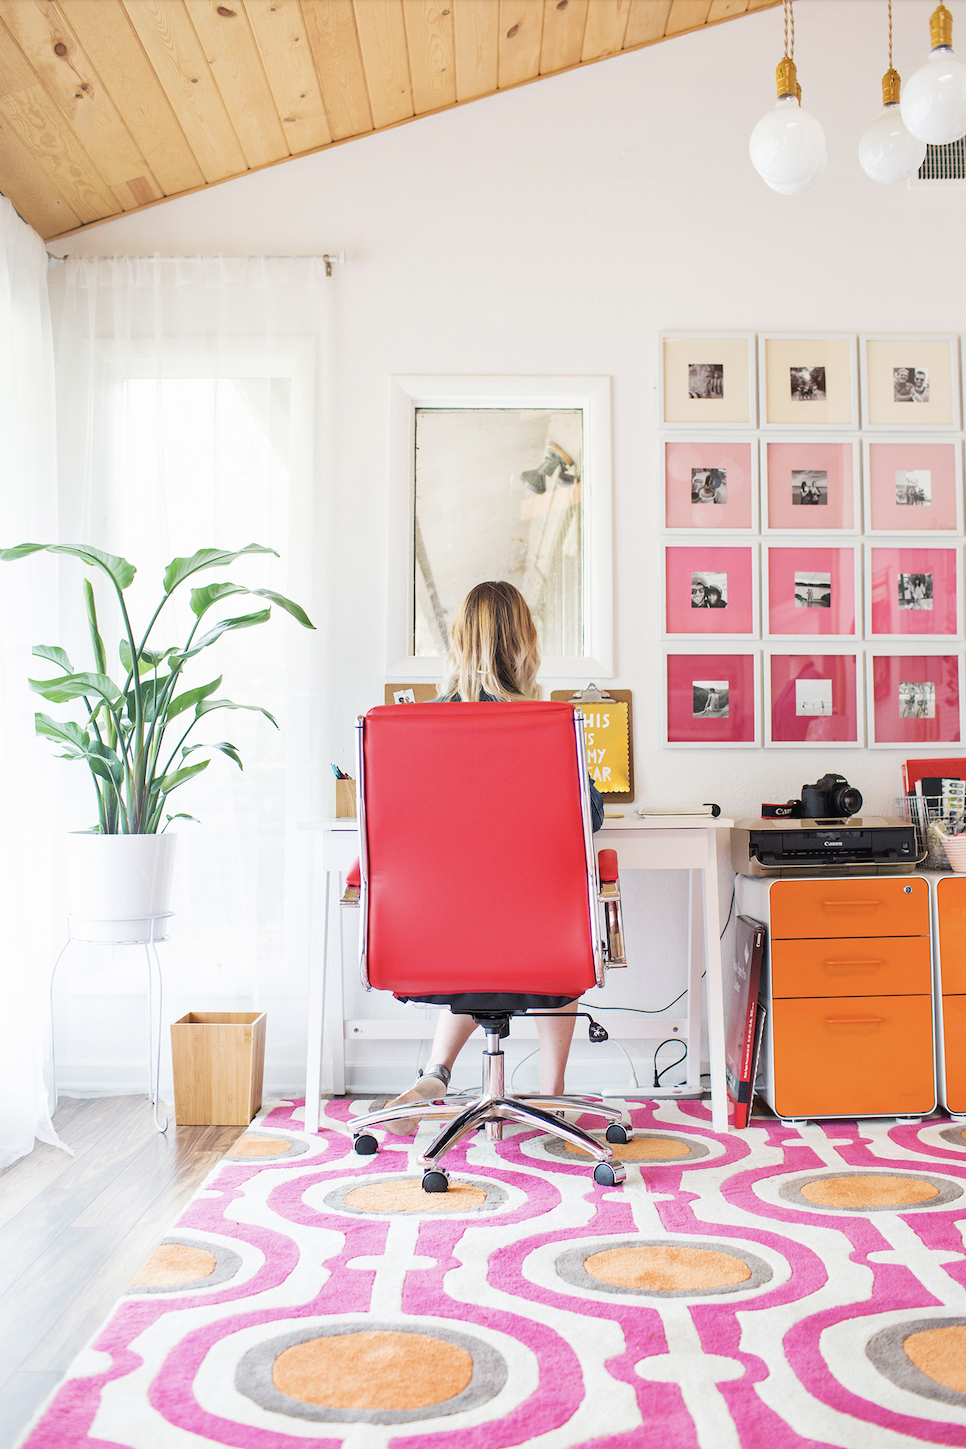 13 Beautiful Home Office Design Ideas to Show Your Personality